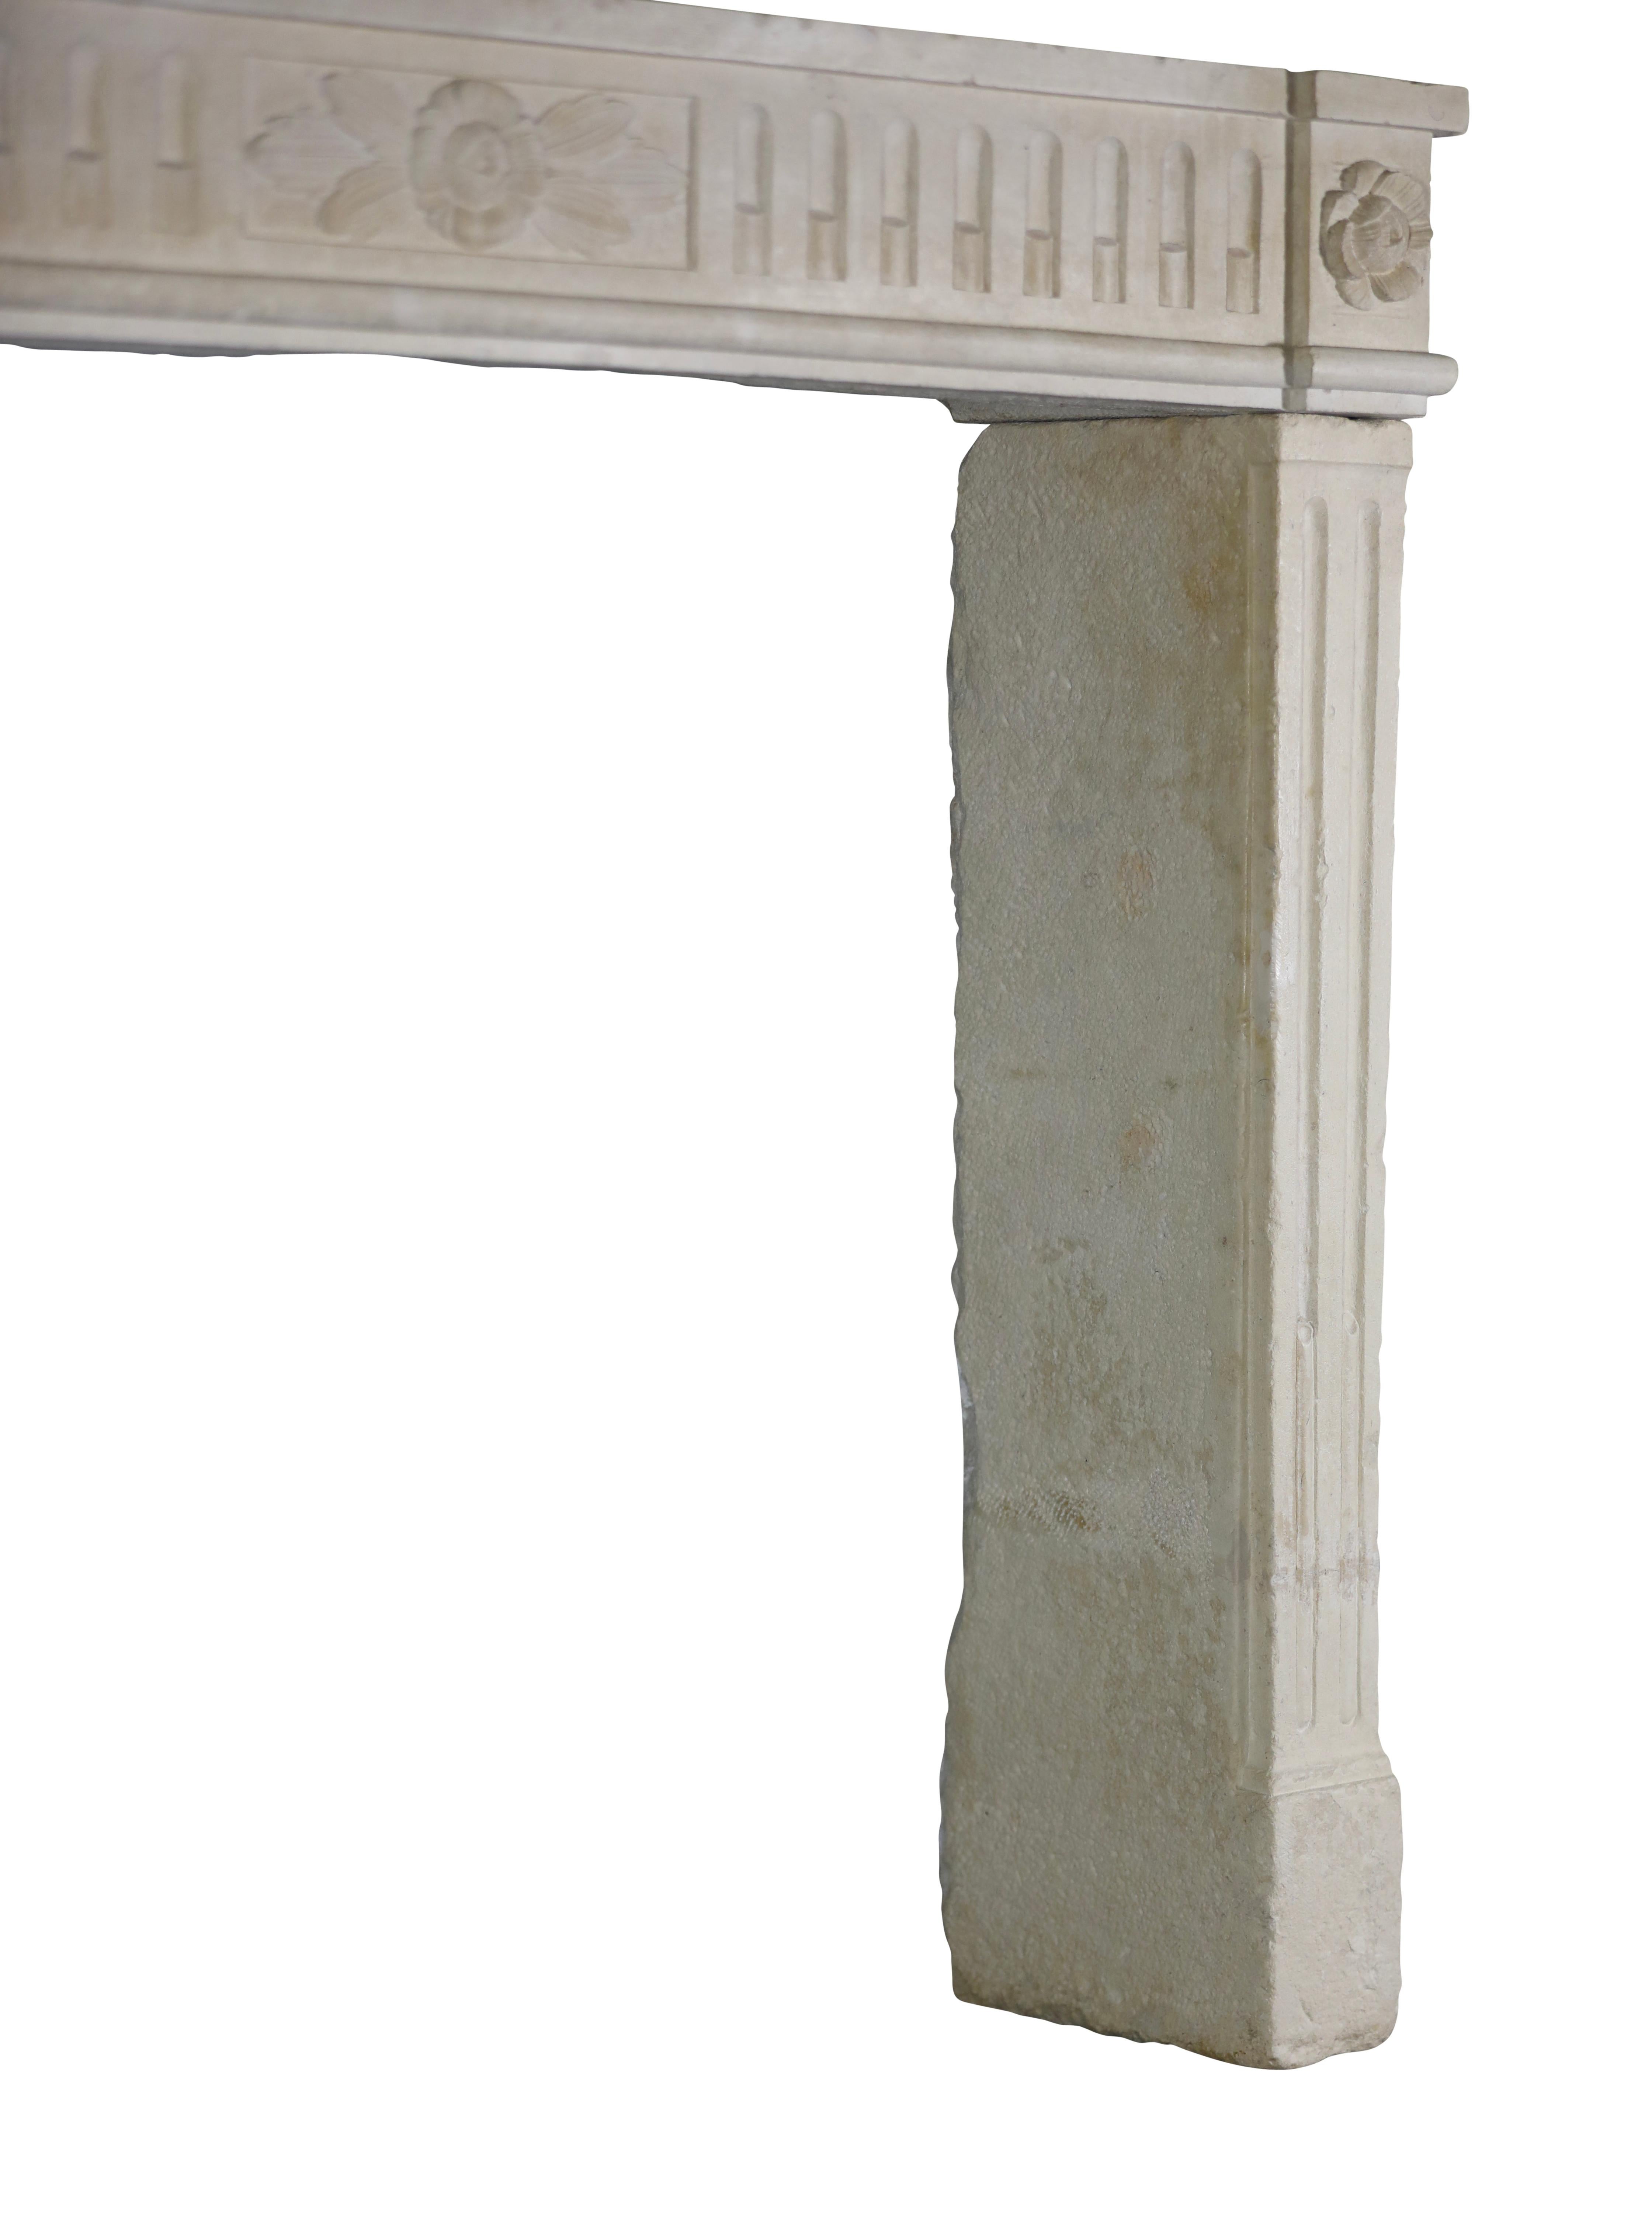 Exquisite Classic French Antique Limestone Fireplace Surround For Sale 5